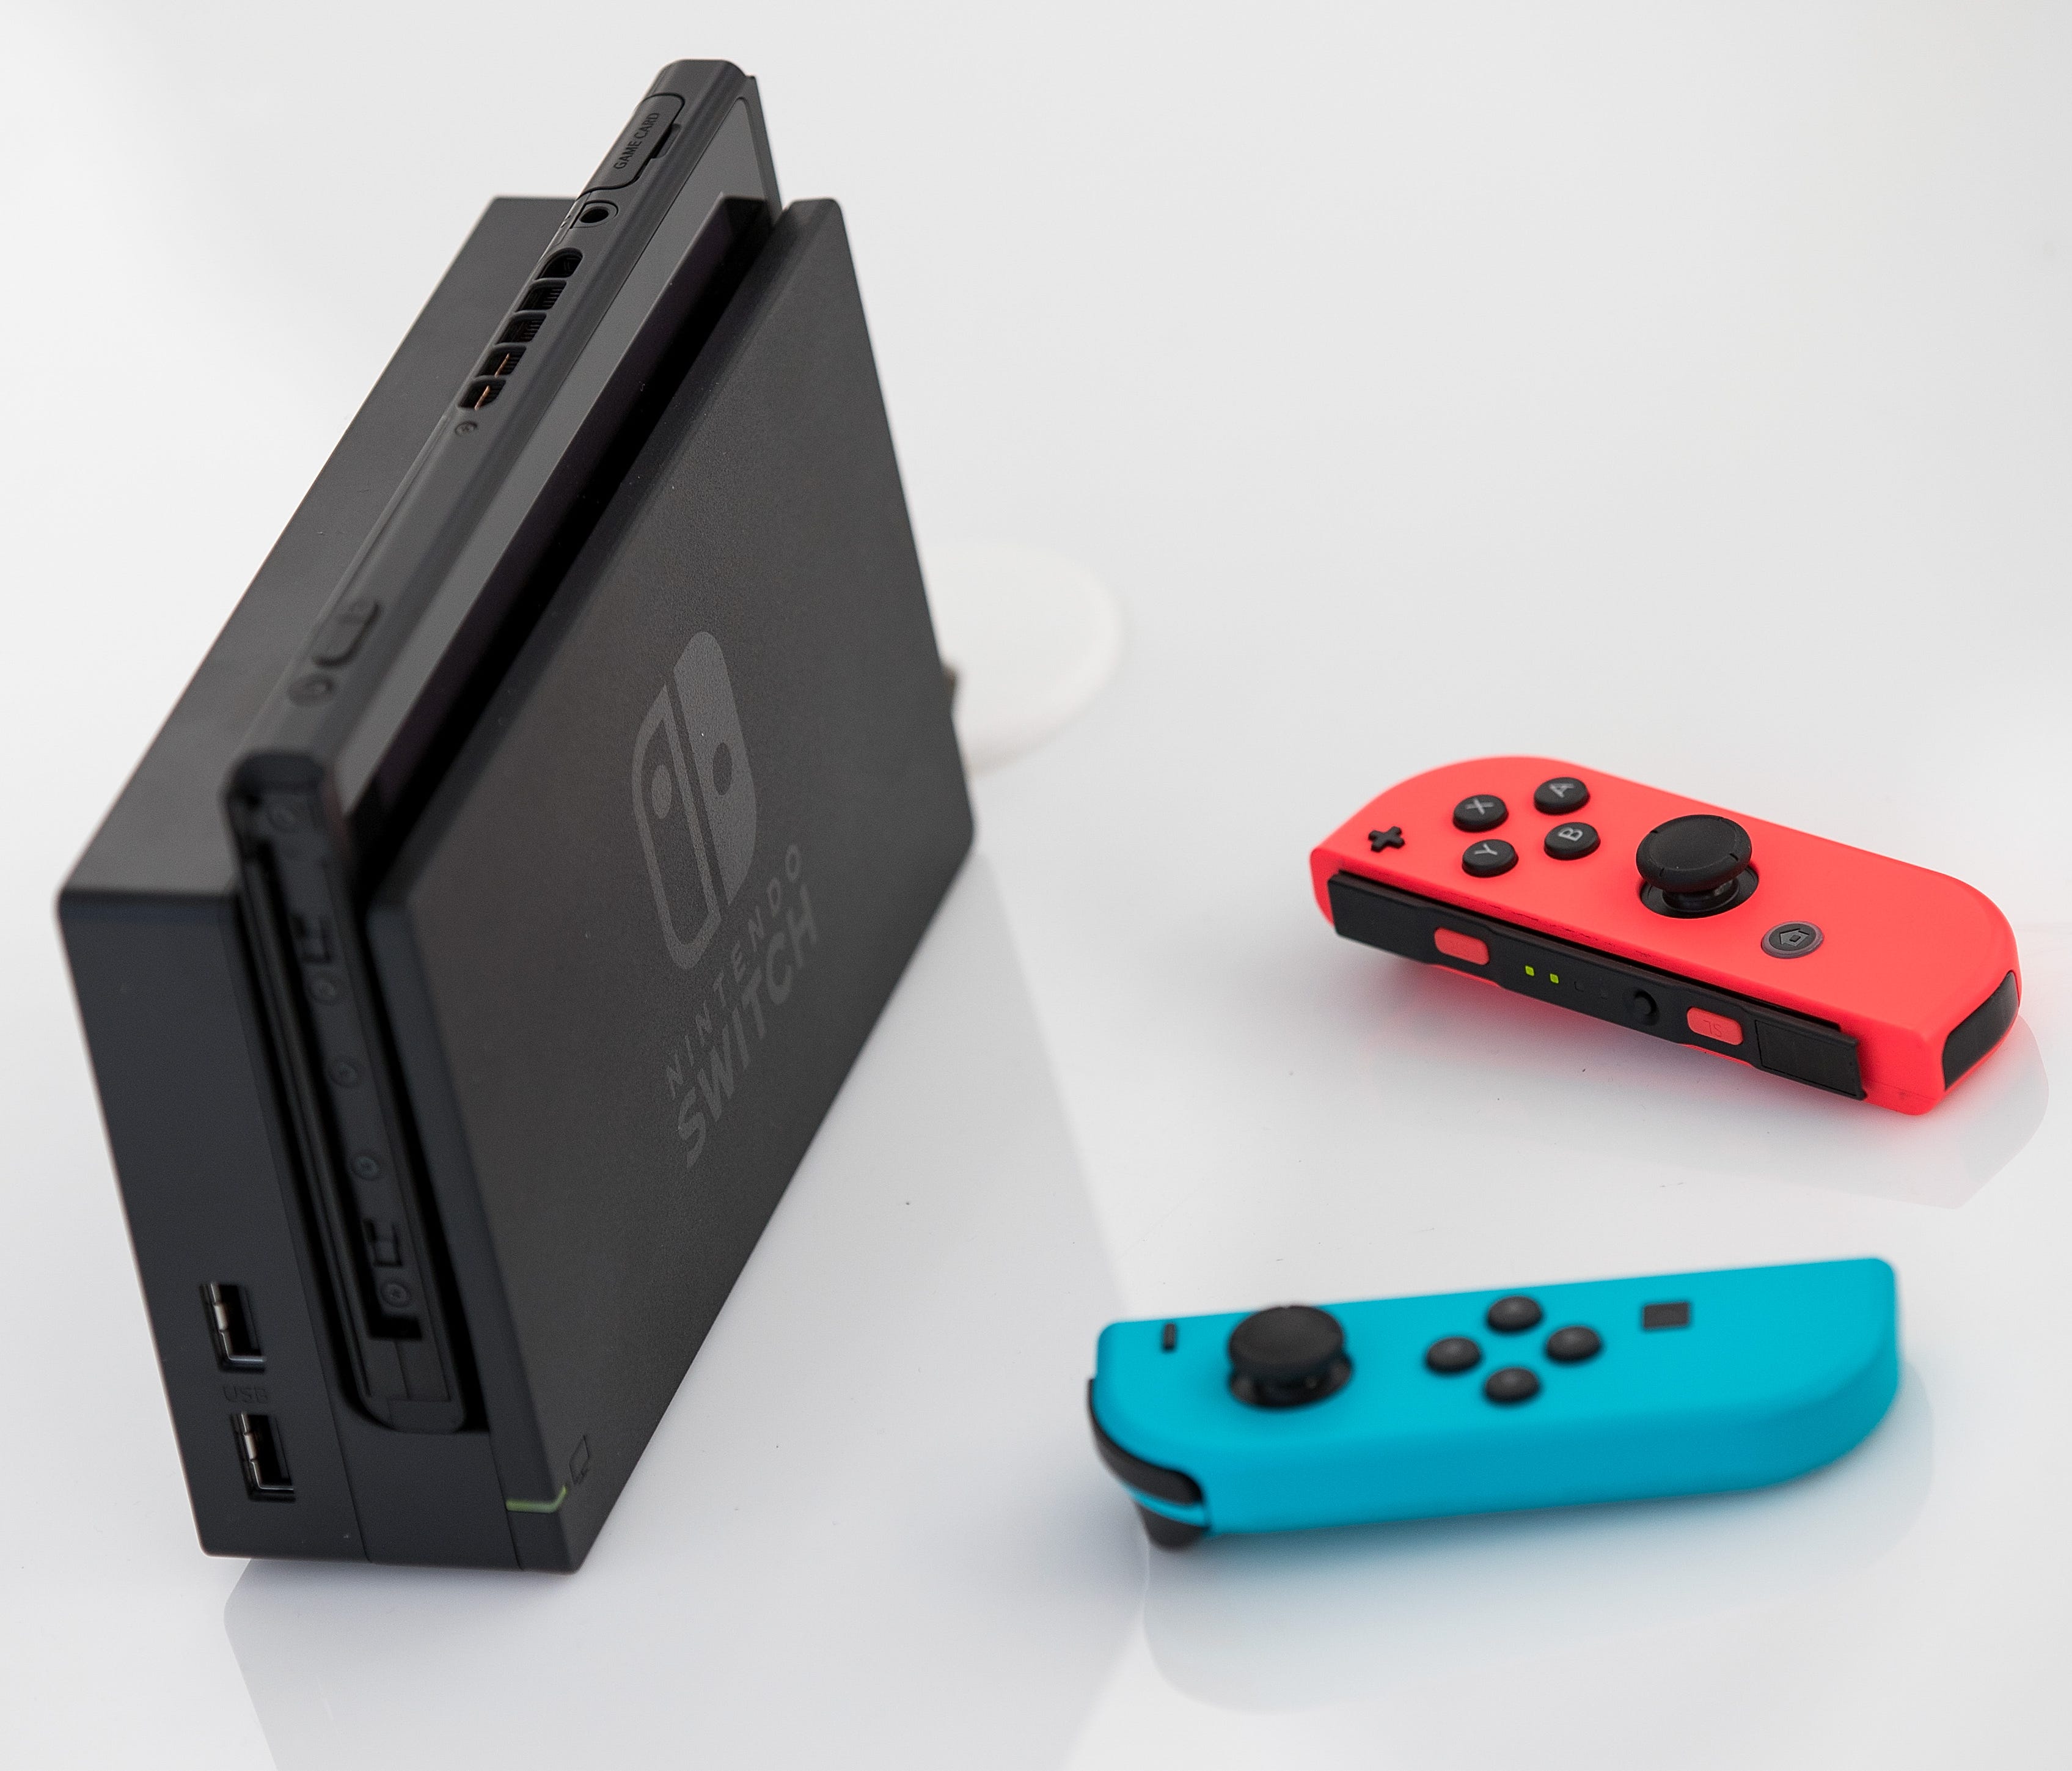 NEW YORK, NY - MARCH 3: The new Nintendo Switch game console is displayed at a pop-up Nintendo venue in Madison Square Park, March 3, 2017 in New York City. The Nintendo Switch console goes on sale today and retails for 300 dollars. (Photo by Drew An